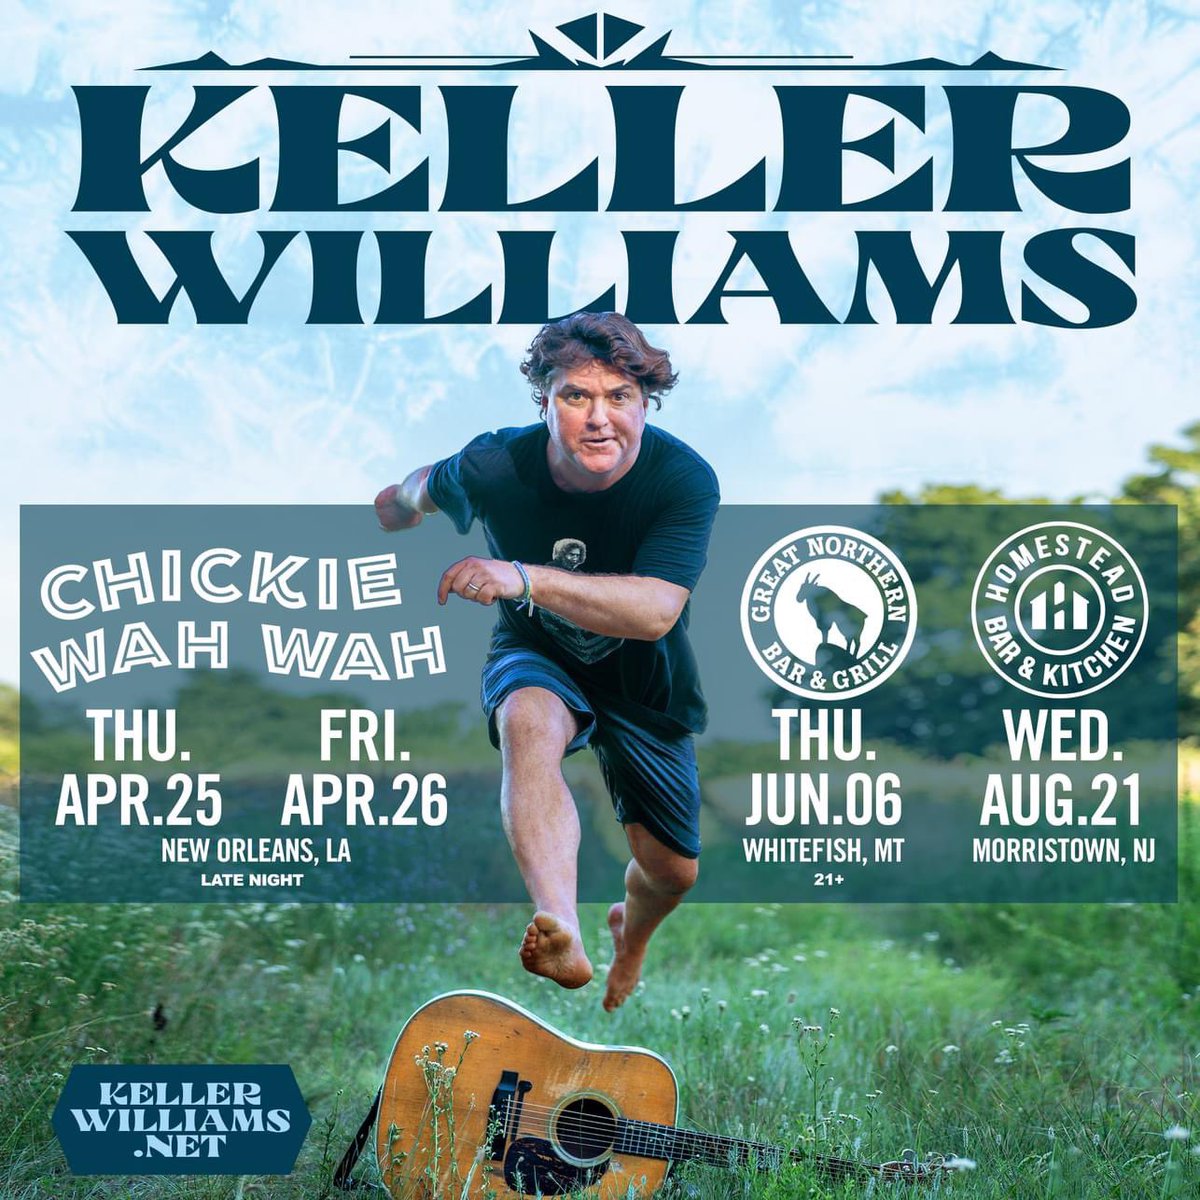 📣JUST ANNOUNCED! 2 #latenightjazzfest shows @ChickieWahWah NOLA + solo shows in Montana & New Jersey! All🎟️ on sale NOW! kellerwilliams.net/shows